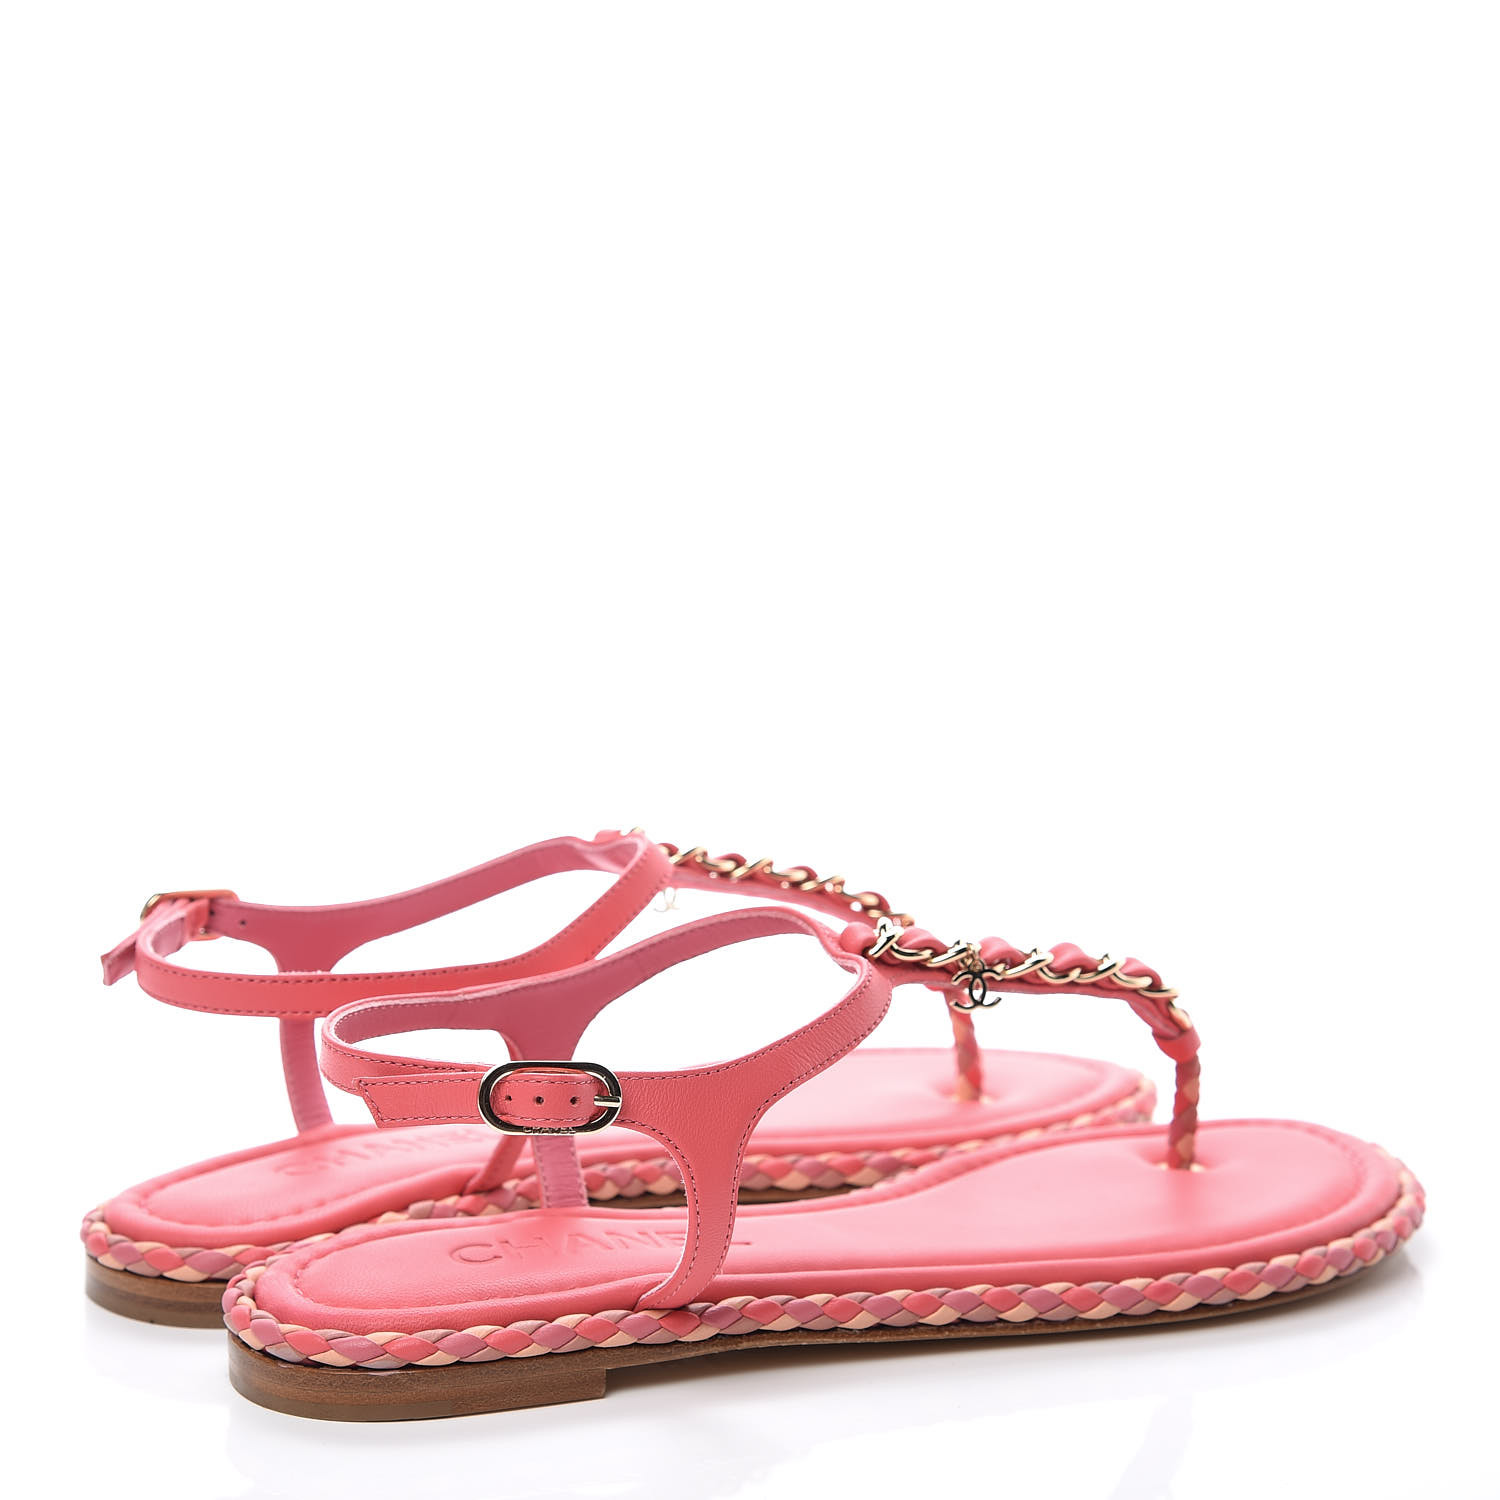 CHANEL Lambskin CC Chain Thong Sandals 38 Bright Pink 377785